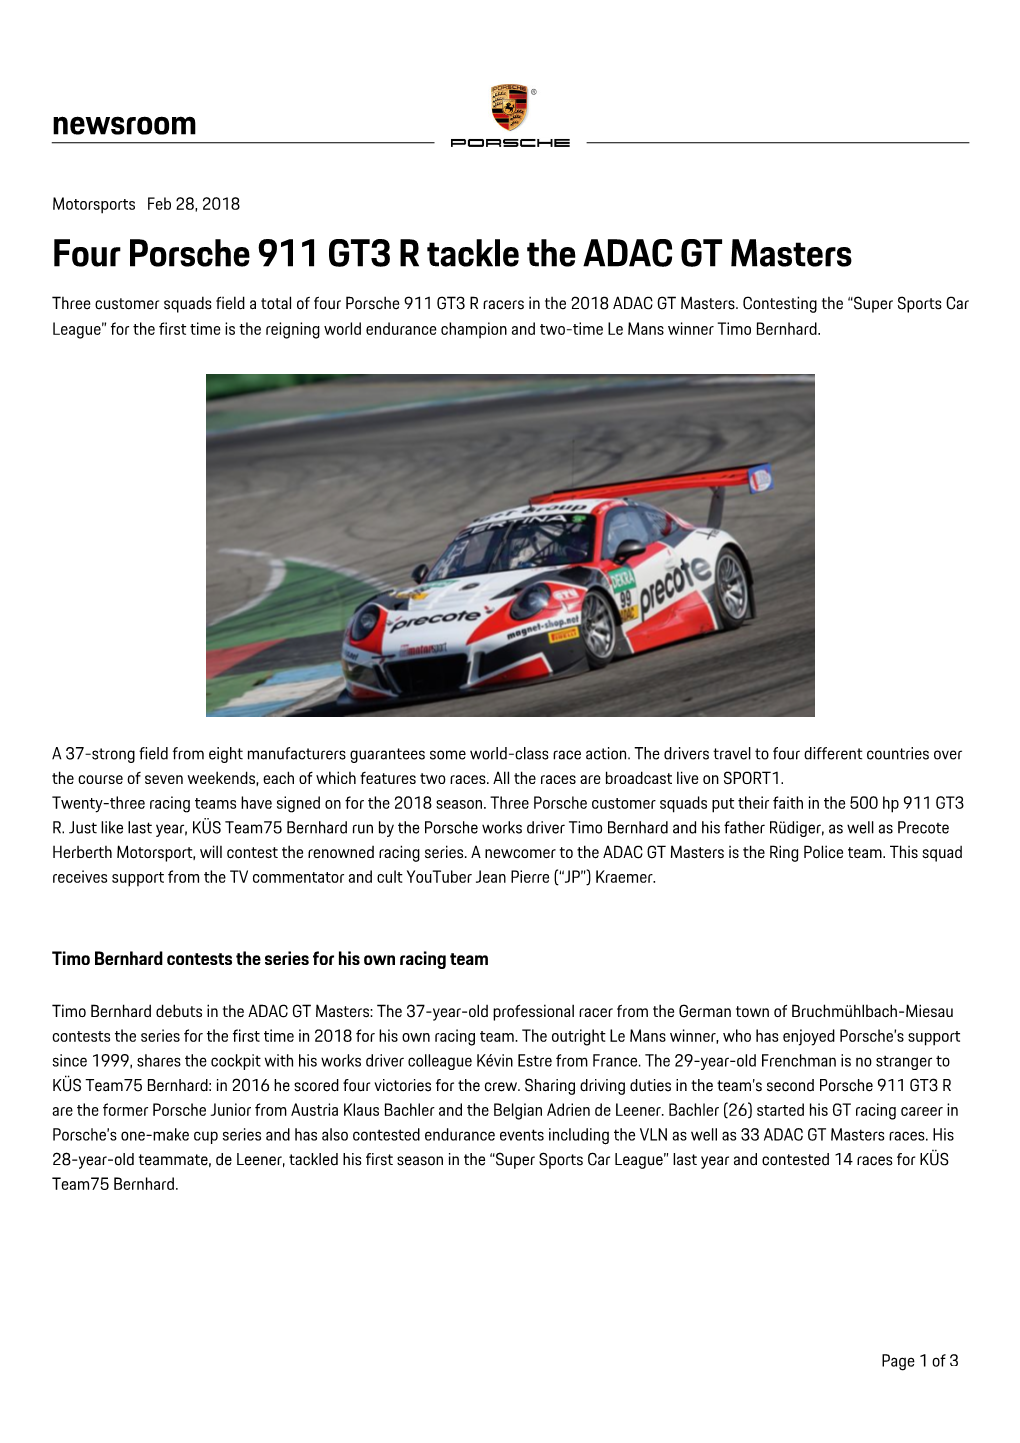 Four Porsche 911 GT3 R Tackle the ADAC GT Masters Three Customer Squads Field a Total of Four Porsche 911 GT3 R Racers in the 2018 ADAC GT Masters